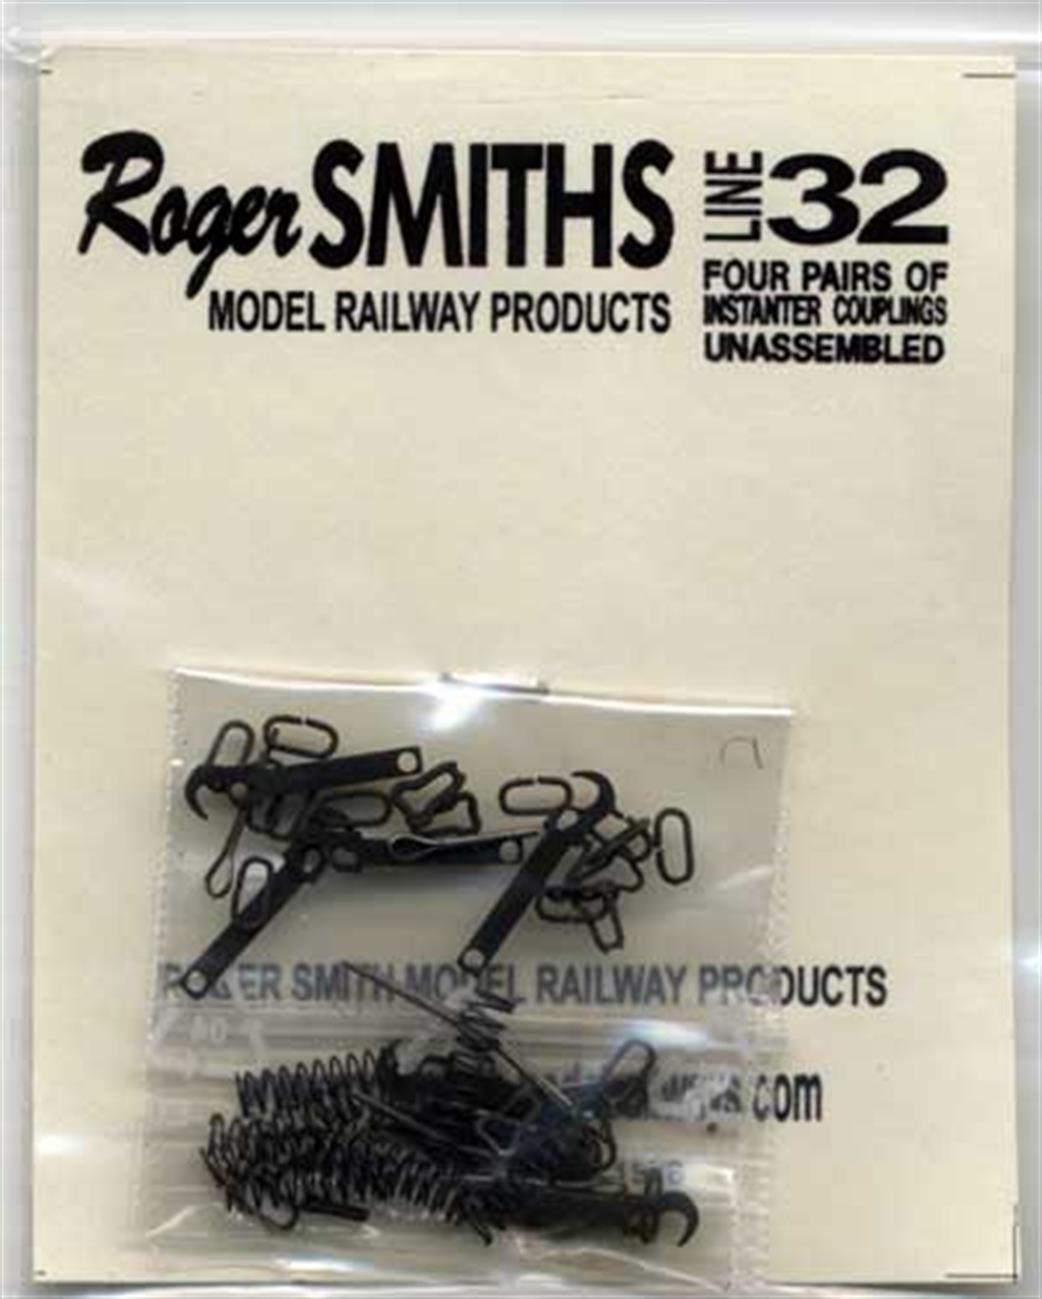 Roger Smith OO LINE32 Instanter Type 3-Link Couplings 4 Pairs Kit